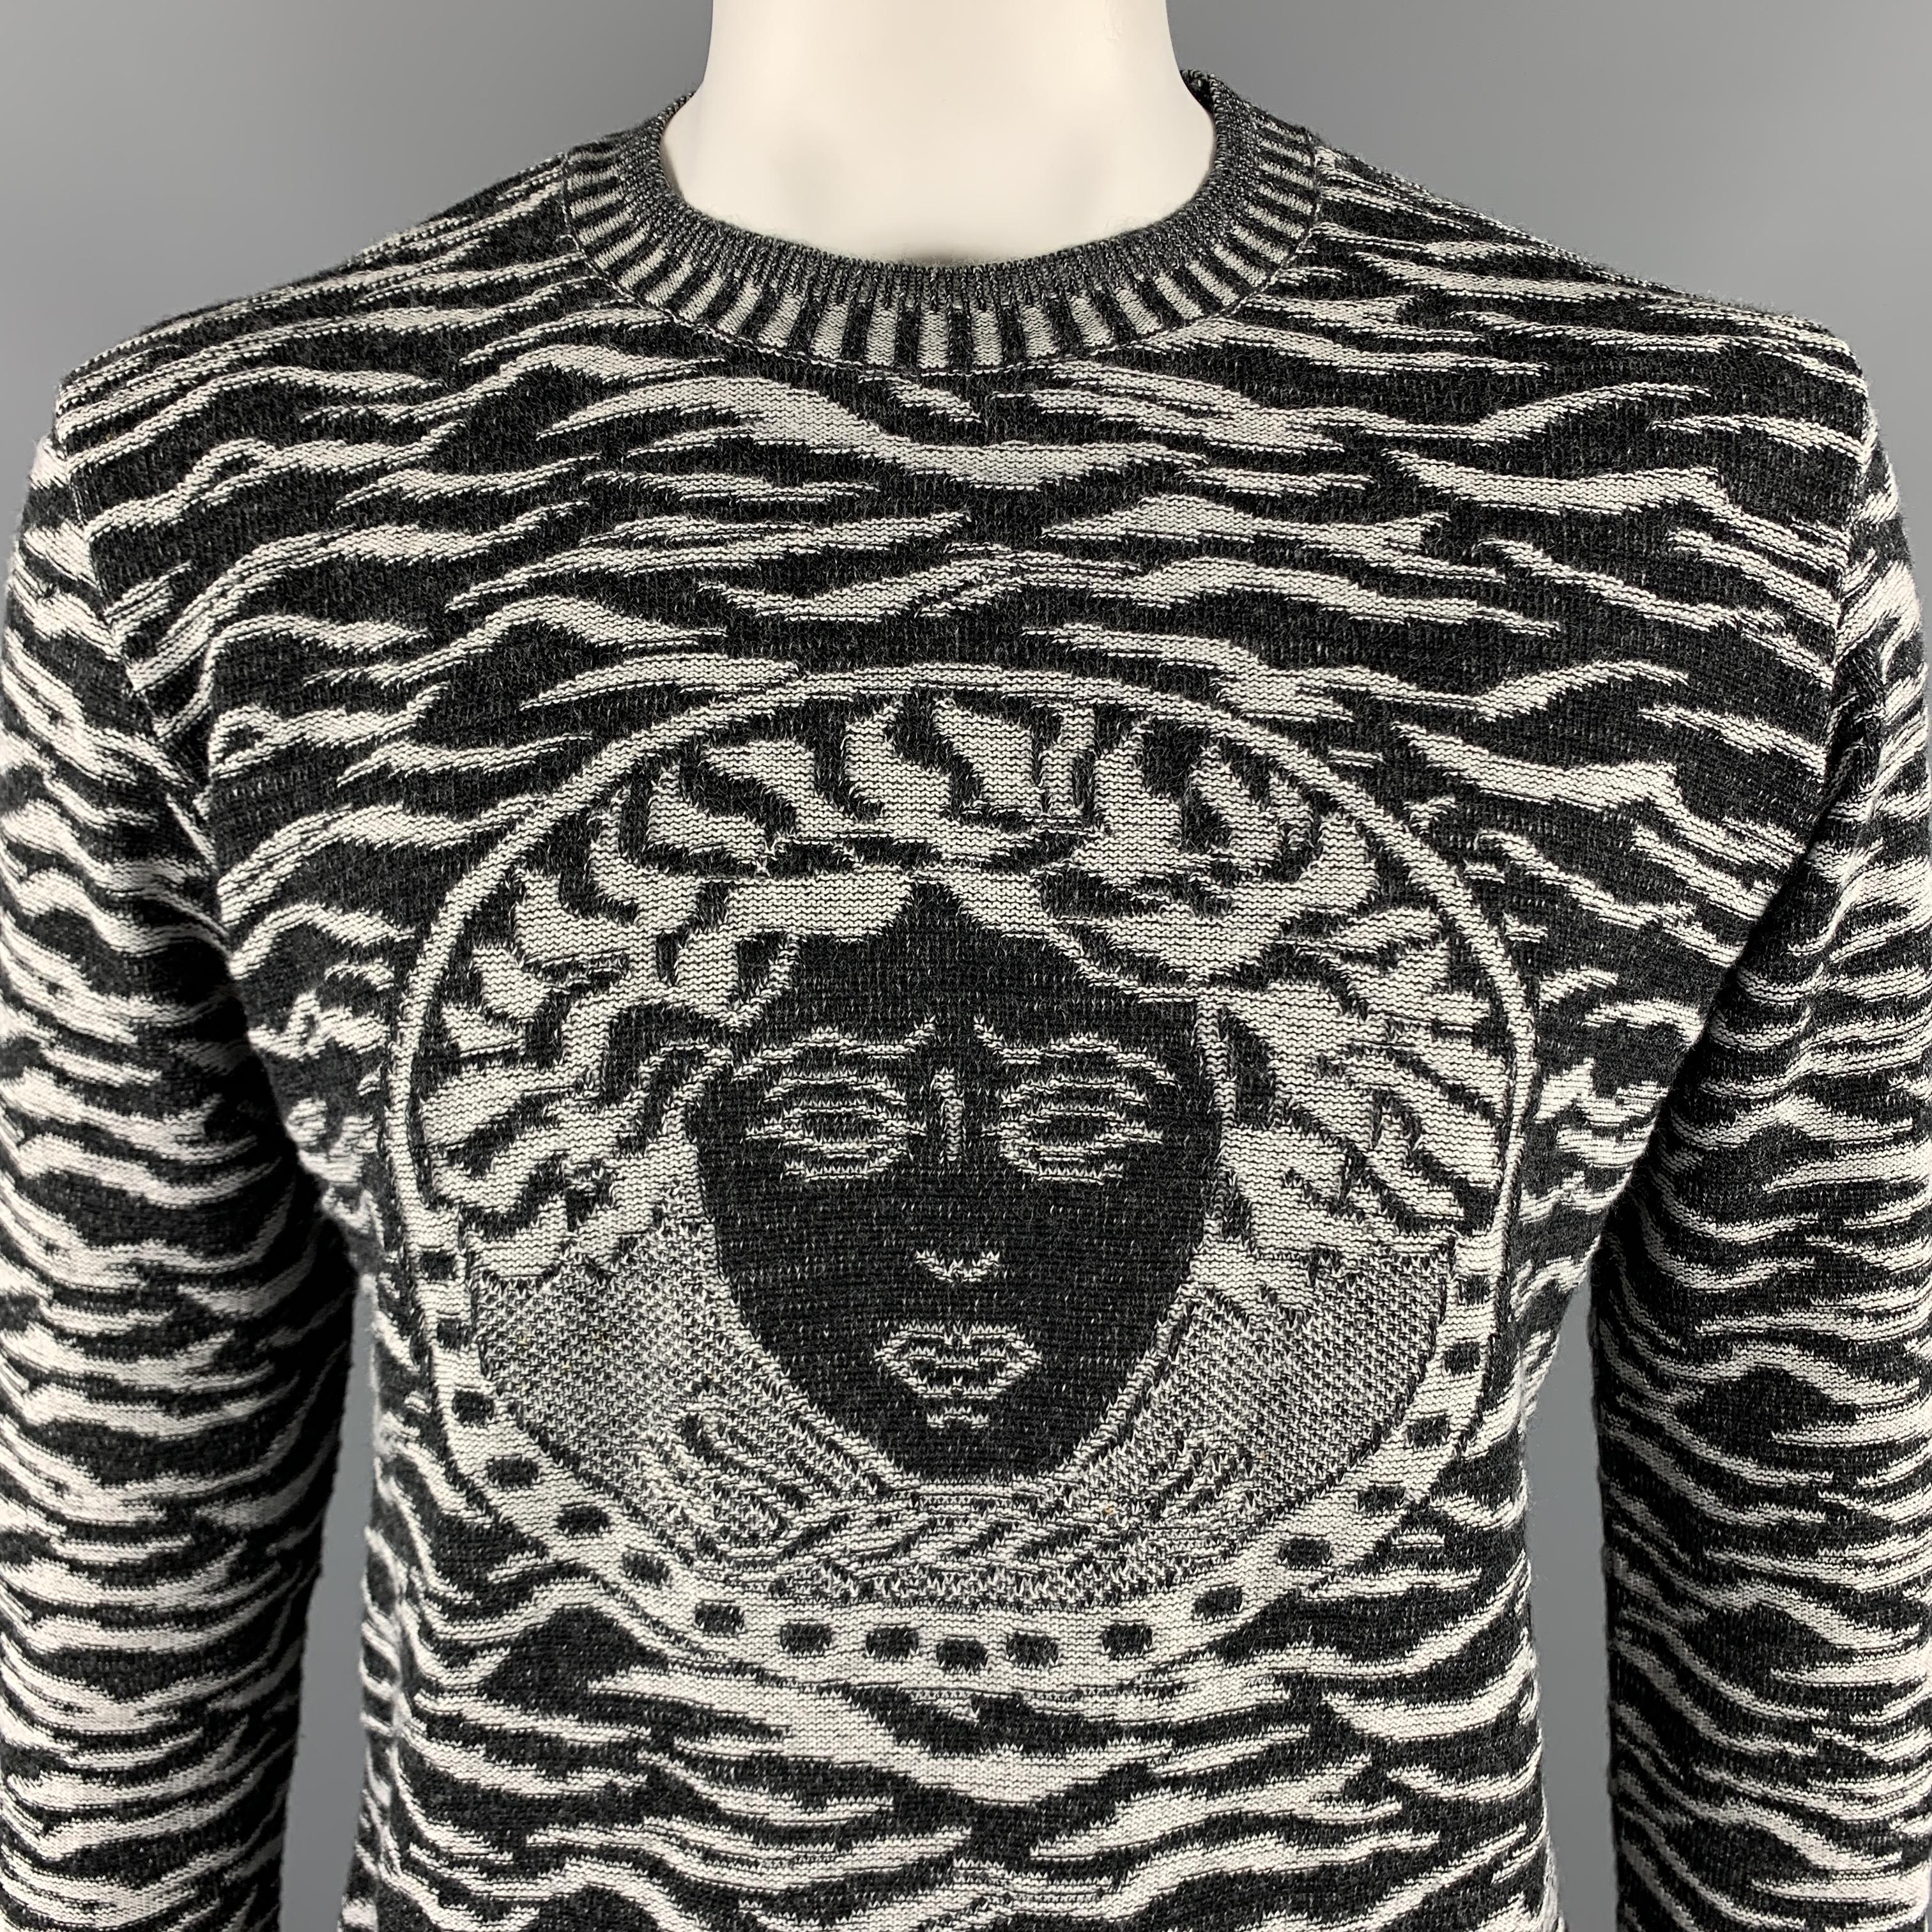 VERSACE JEANS COUTURE pullover sweater comes in  black and grey textured wool material, featuring a woven medusa head at chest, a crewneck, and ribbed cuffs and hem. Made in Italy.

Excellent Pre-Owned Condition.
Marked: XXL